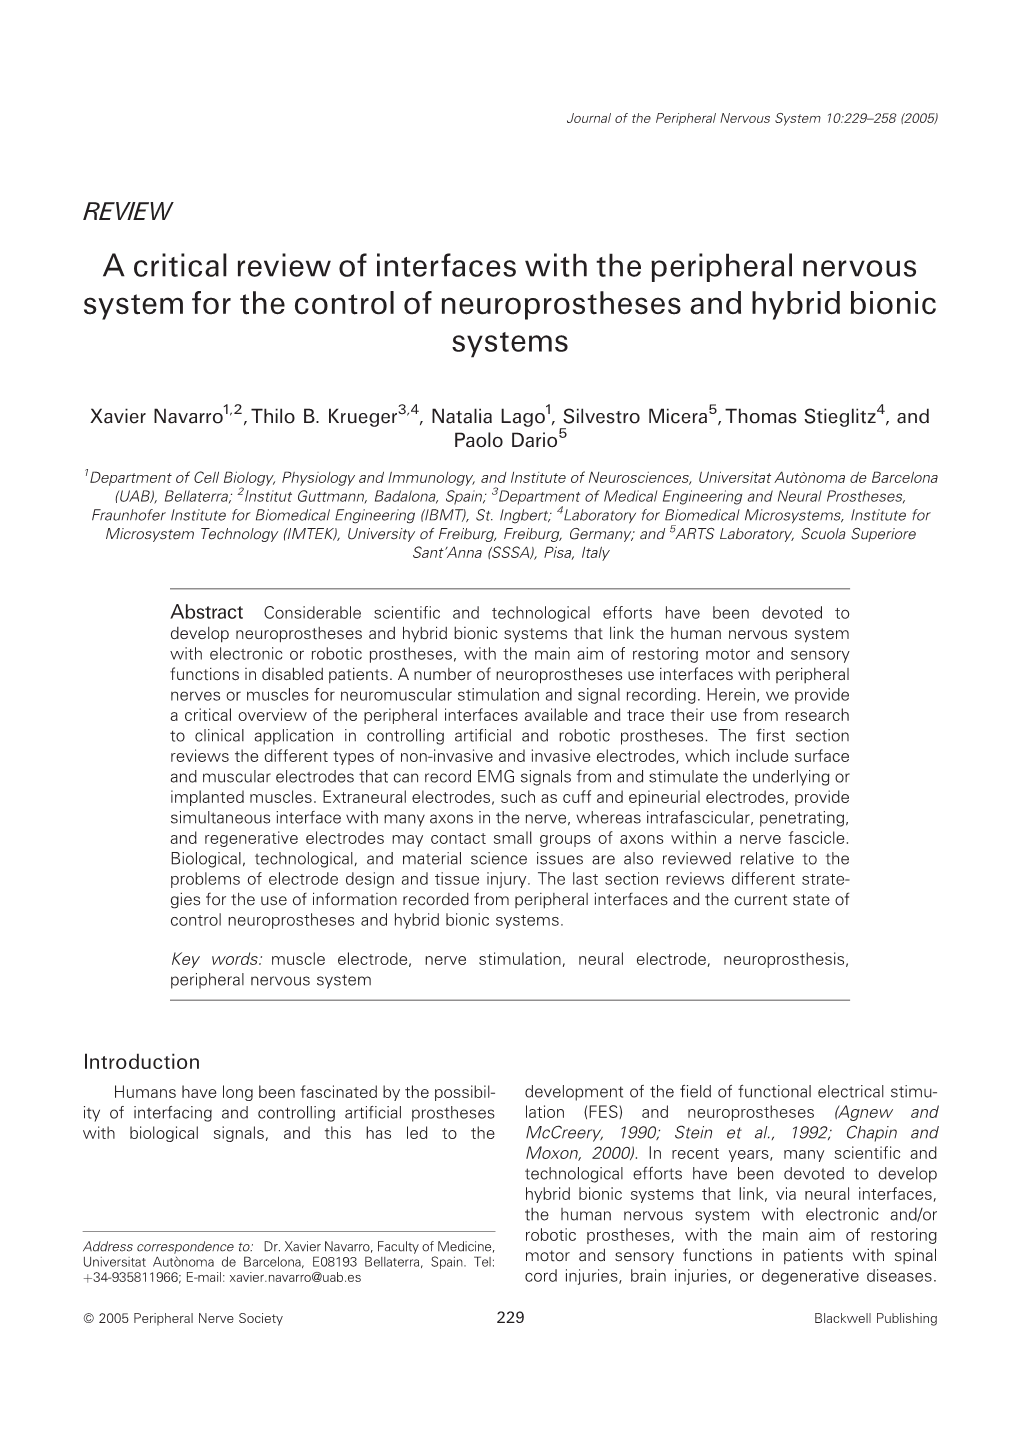 A Critical Review of Interfaces with the Peripheral Nervous System for the Control of Neuroprostheses and Hybrid Bionic Systems